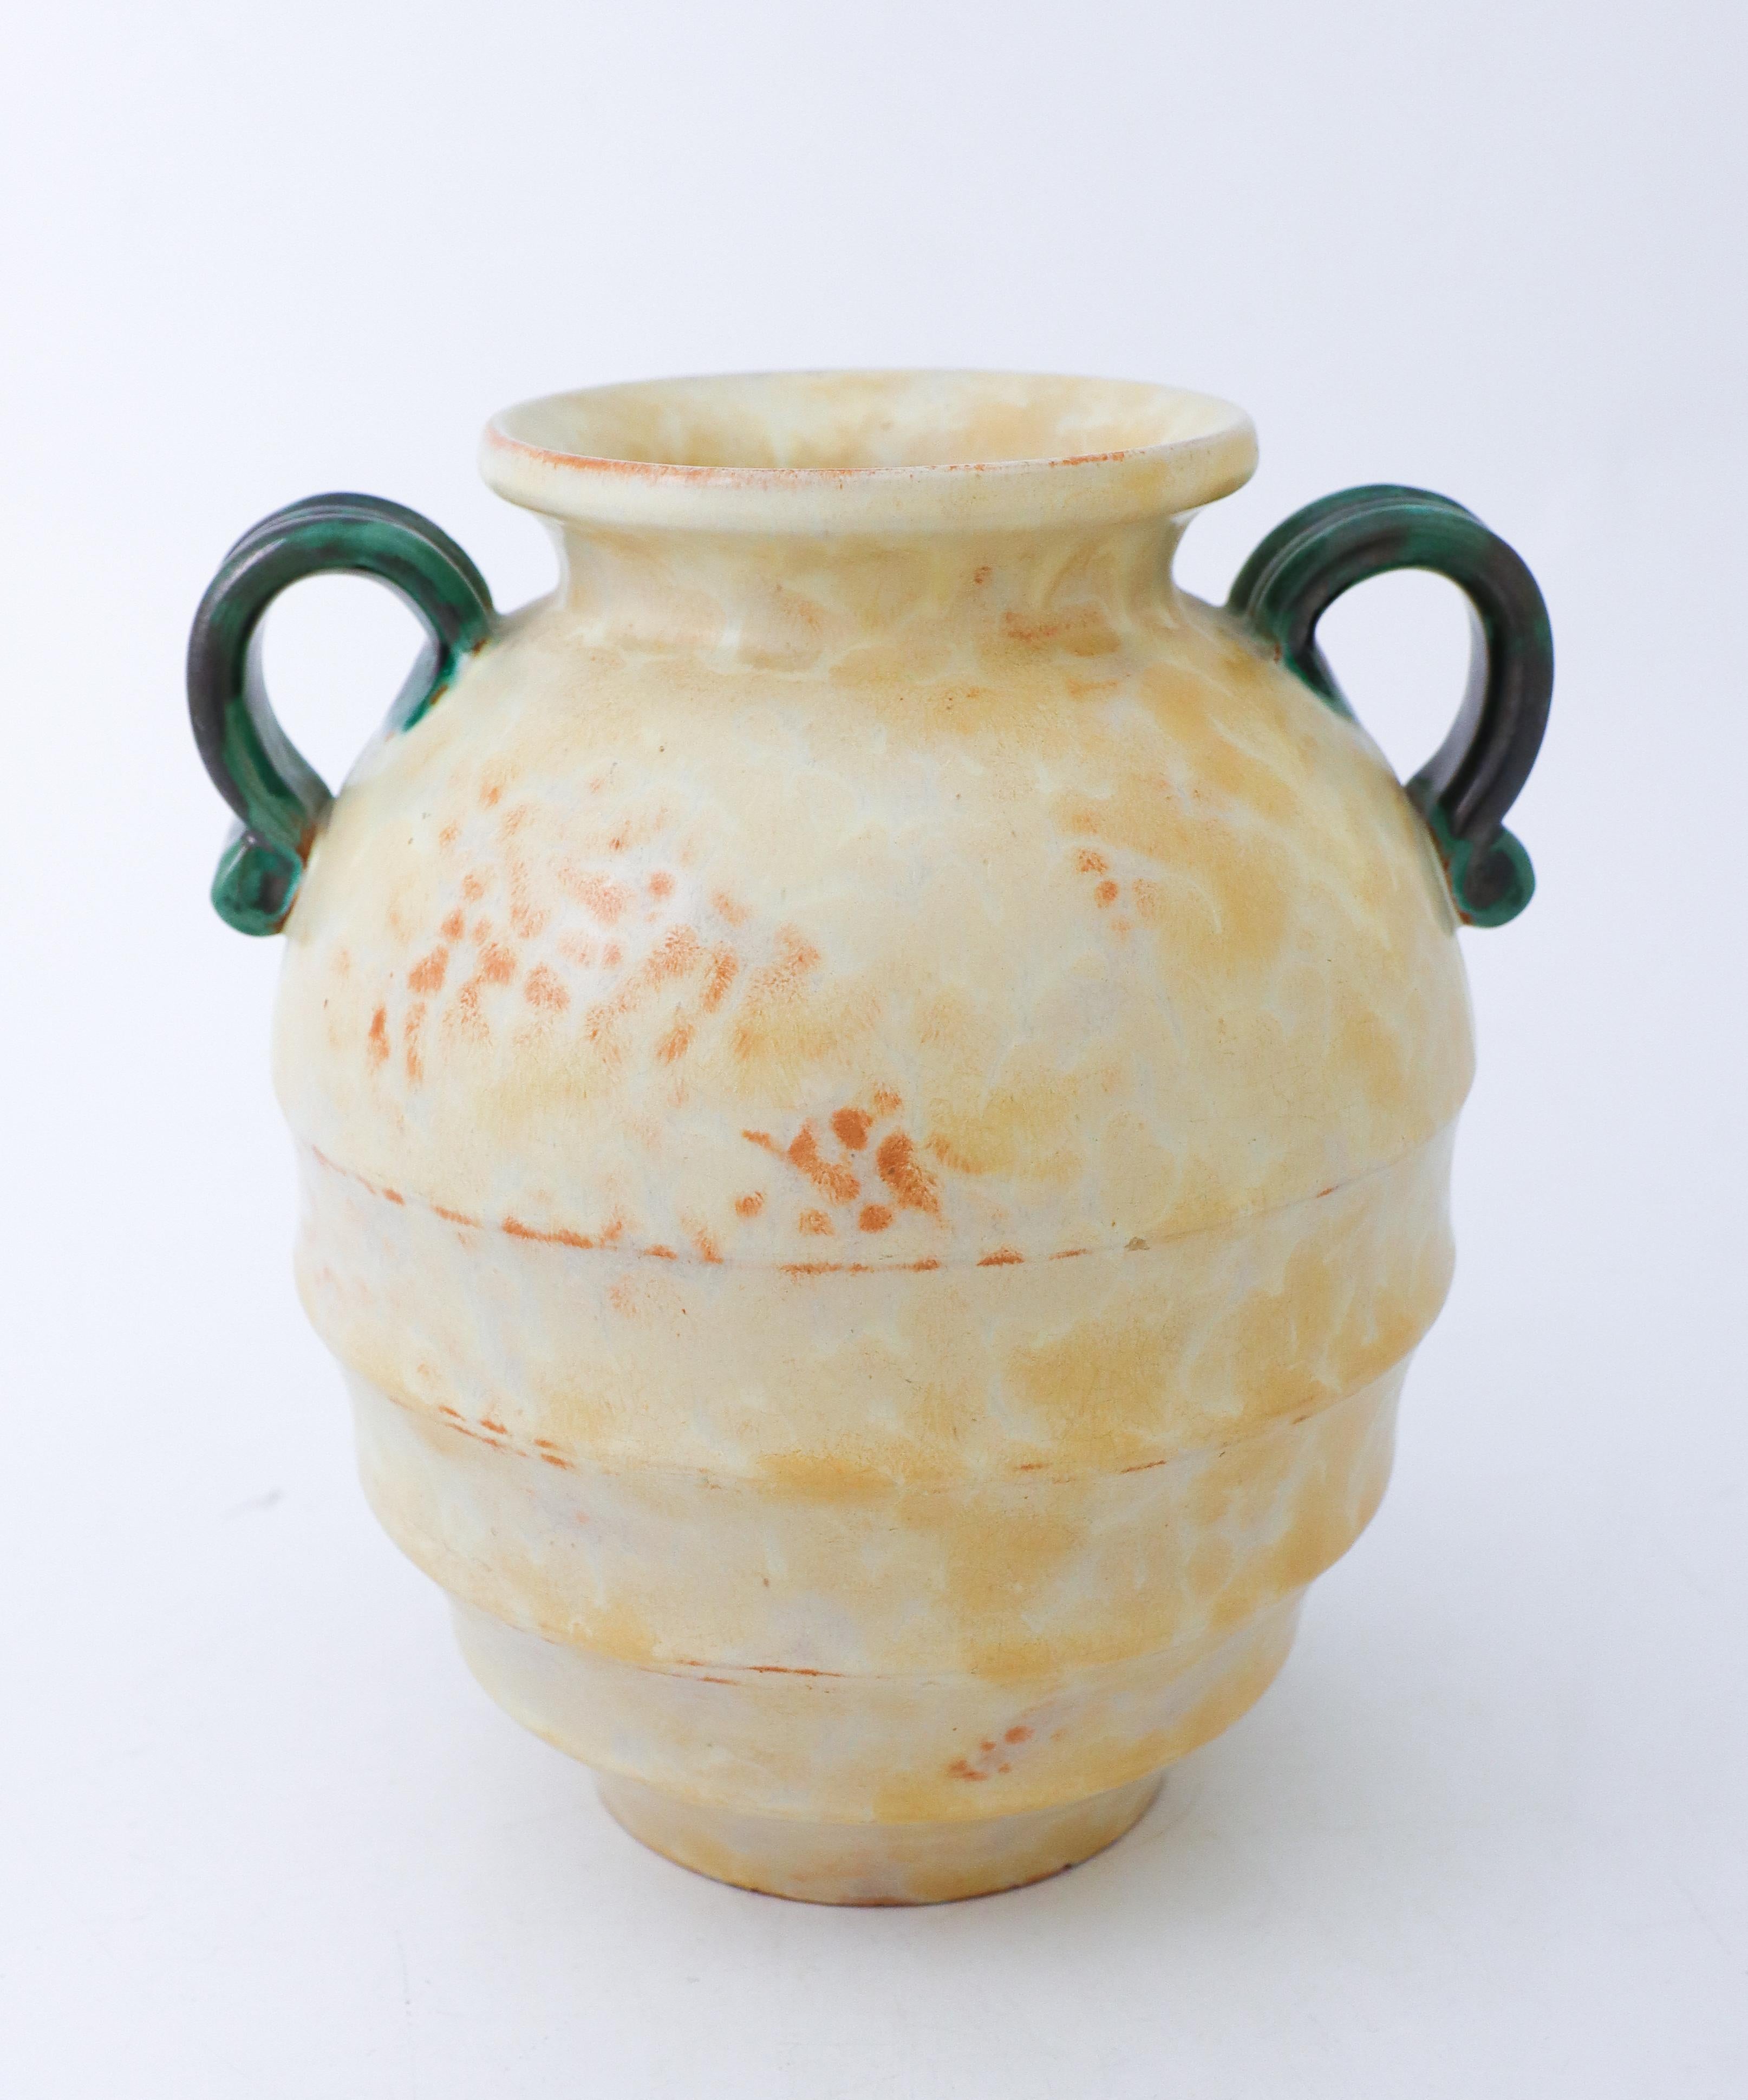 A beautiful ceramic vase in shape of a classical roman urn, the vase is designed at Upsala Ekeby in the 1930s. It is 21.5 cm (8.6